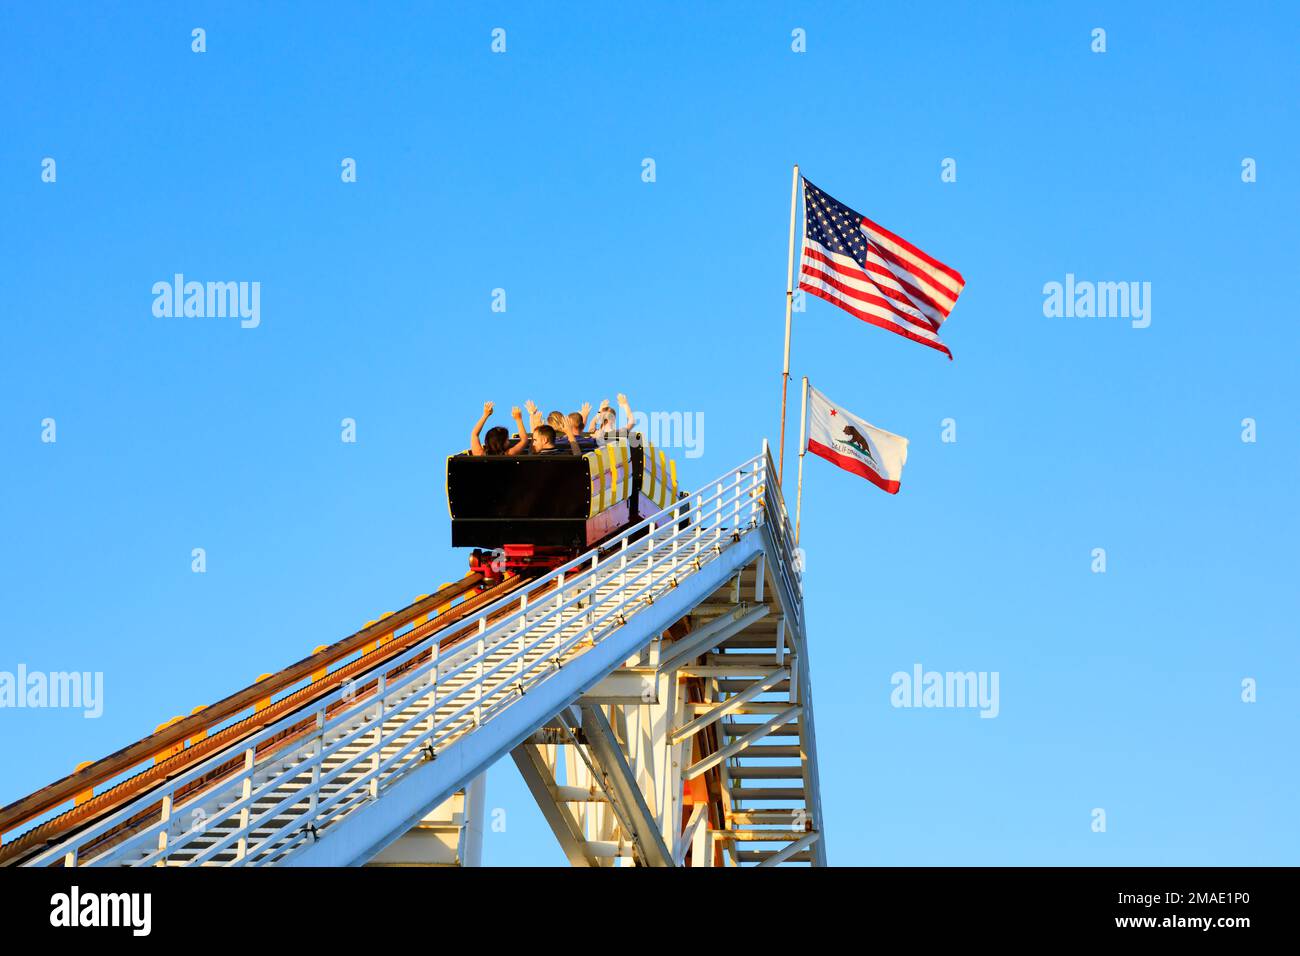 Tourists ride the roller coaster nearing the top with California state flag and stars and stripes. Santa Monica, California, USA Stock Photo